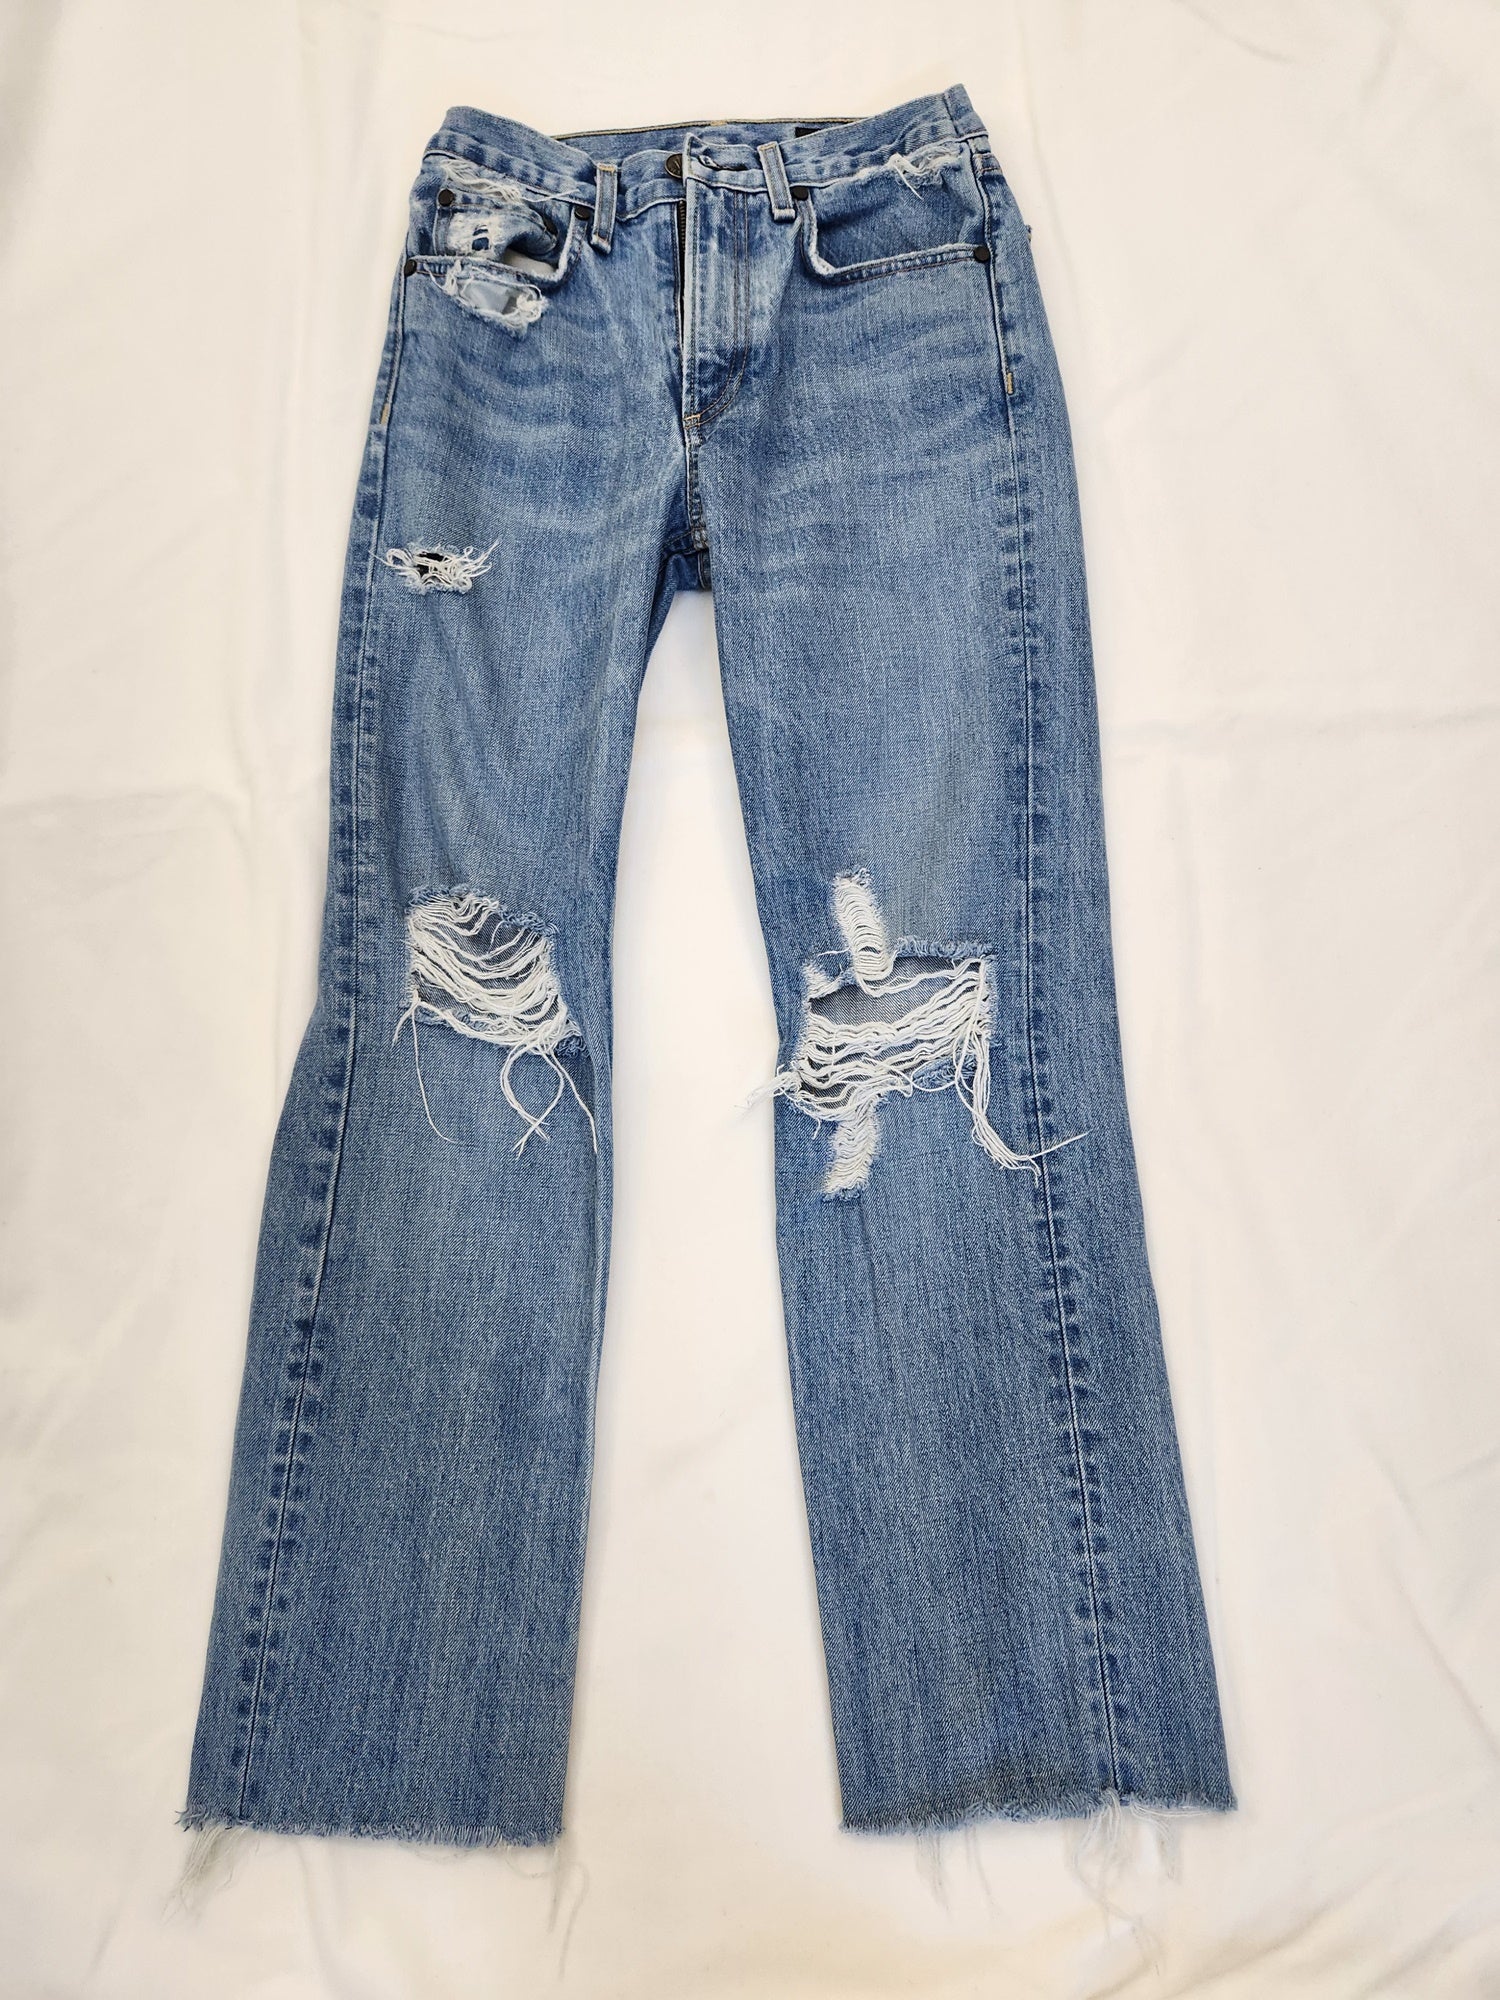 High Rise Straight Leg Jeans Size 24